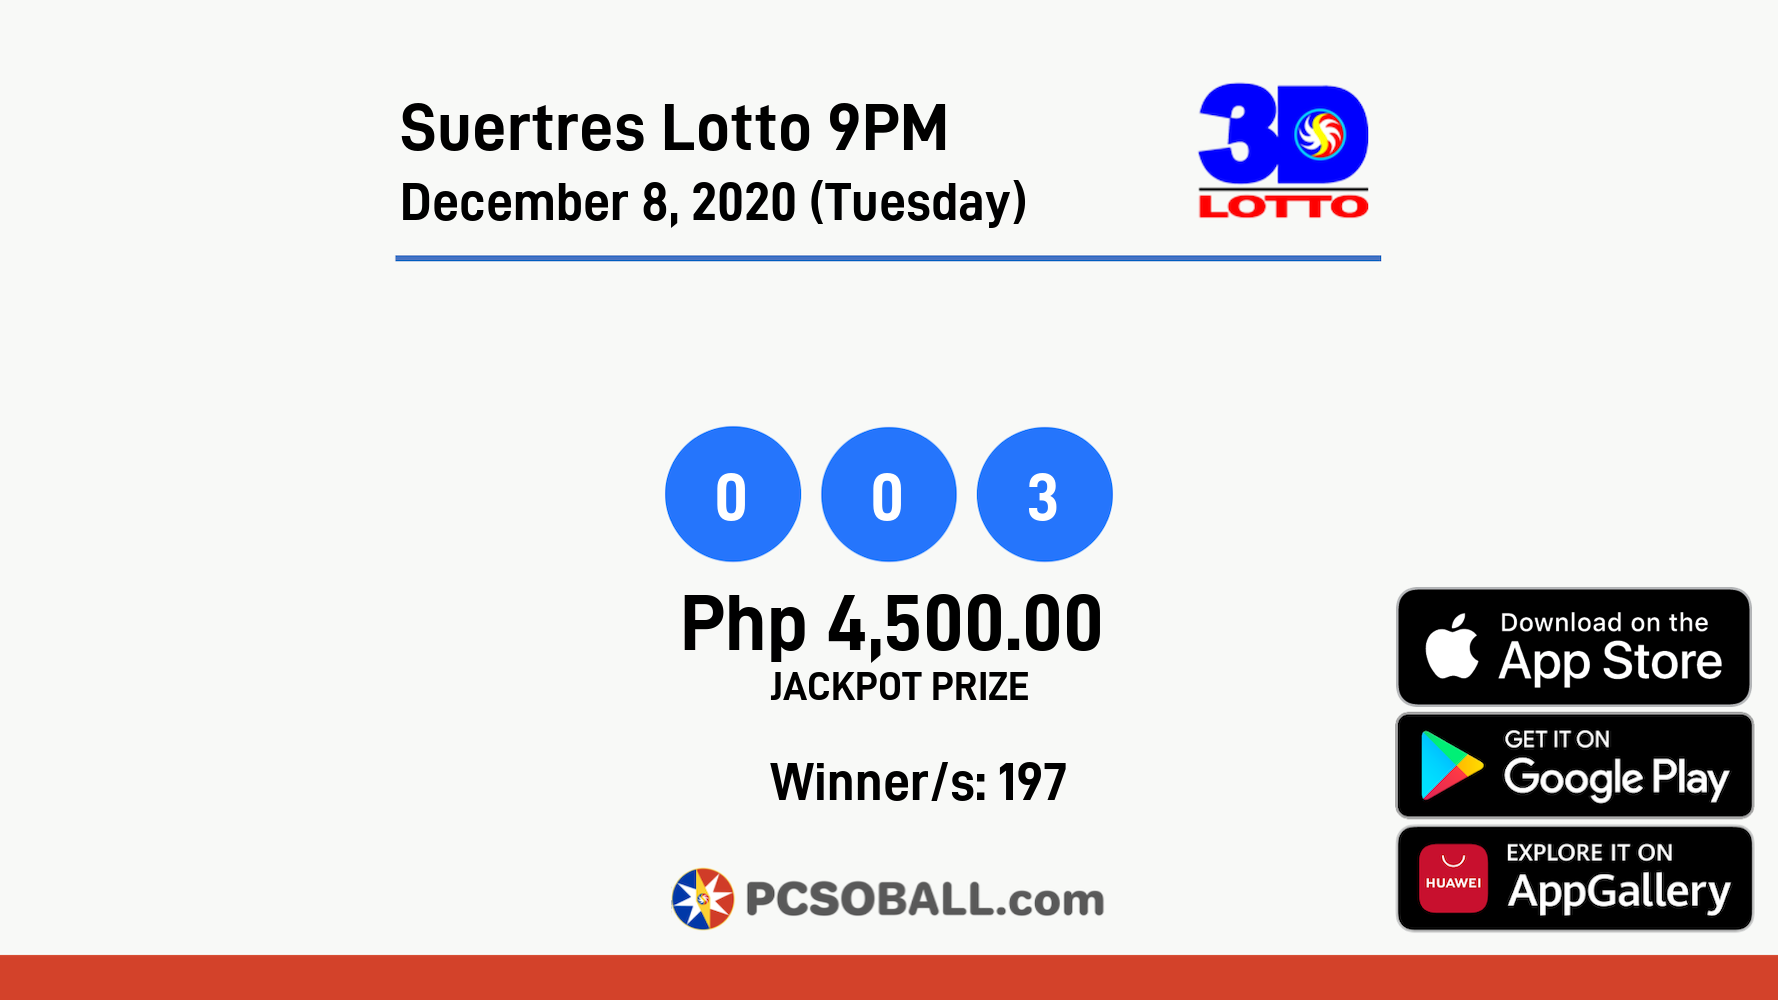 Suertres Lotto 9PM December 8, 2020 (Tuesday) Result